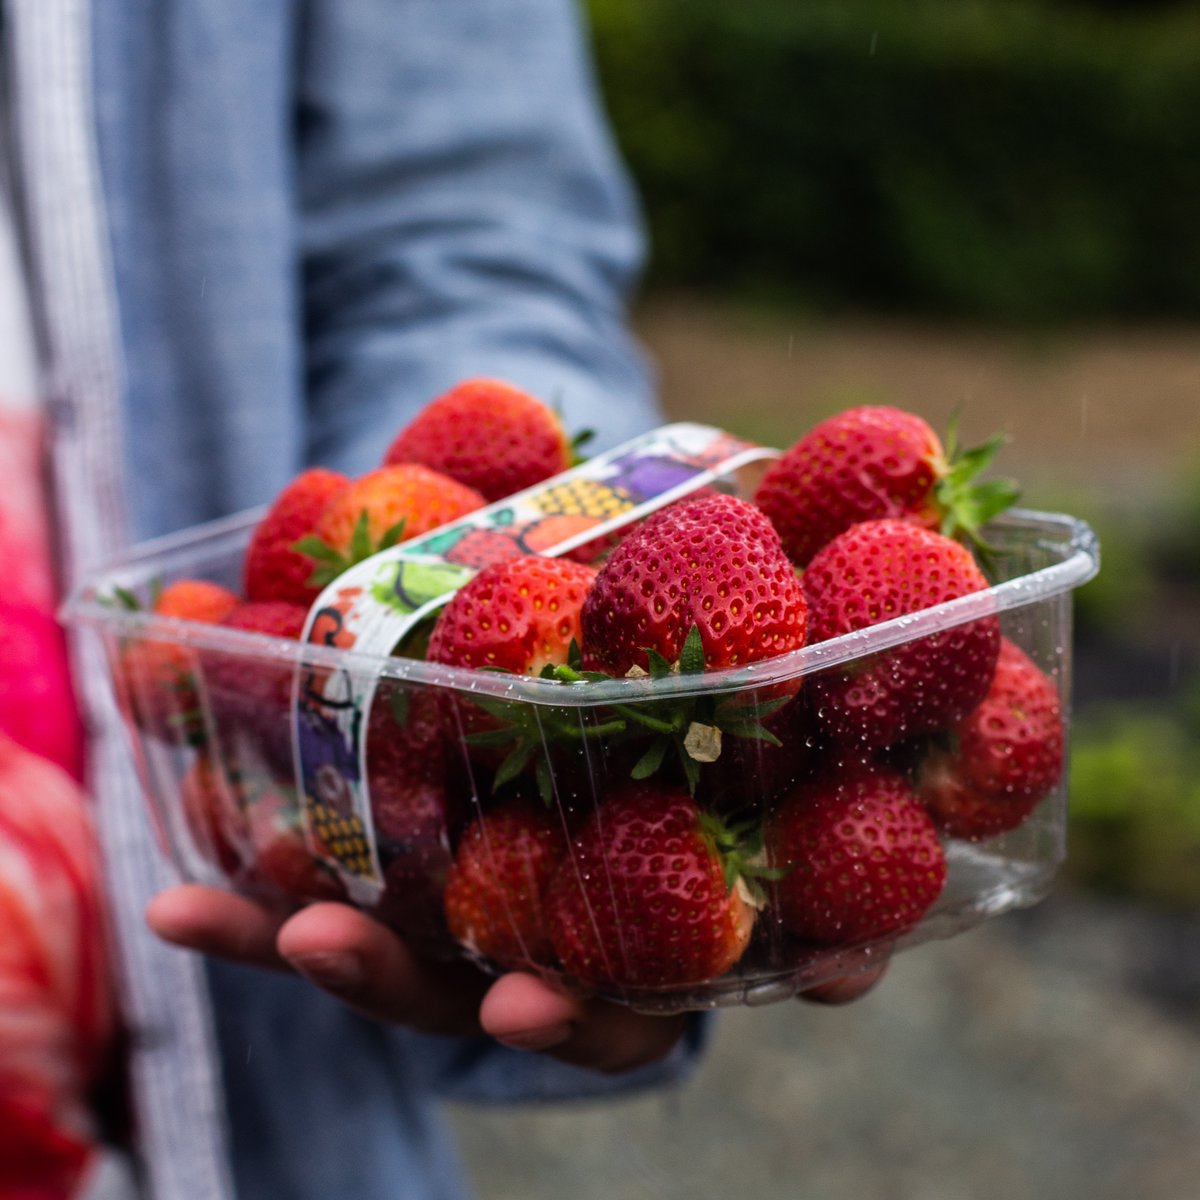 🍓 Strawberry season is soon approaching 🍓 Did you know Wexford is widely known for its roadside huts across the island of Ireland. For more information on Our Heritage 👉tastewexford.ie/our-heritage #TasteWexford #roadsidehut #wexfordstrawberries #farmers #growers #berries